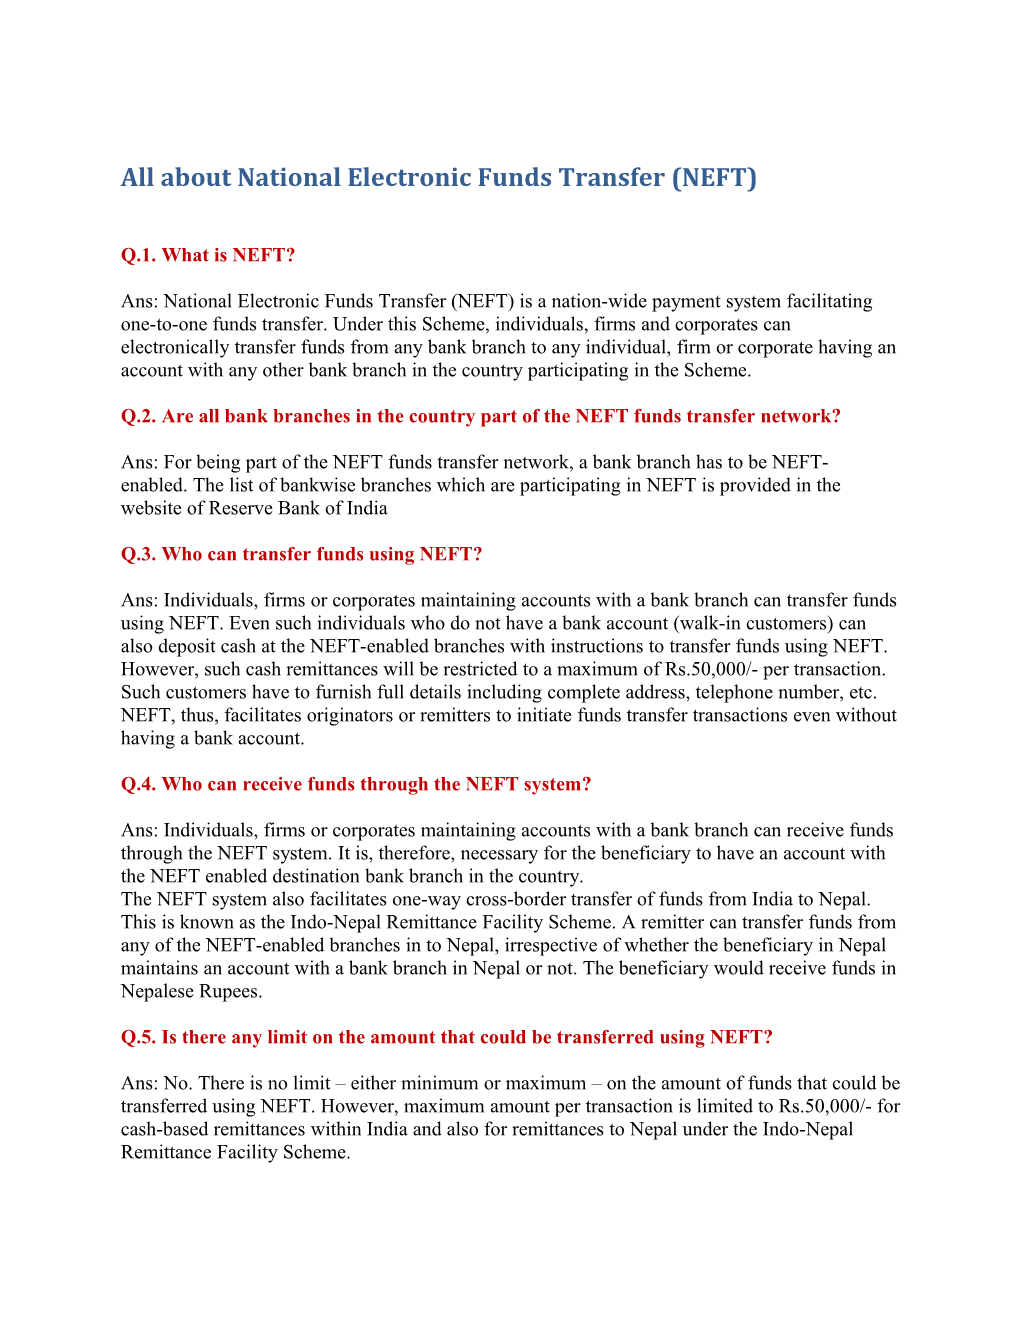 All About National Electronic Funds Transfer (NEFT)